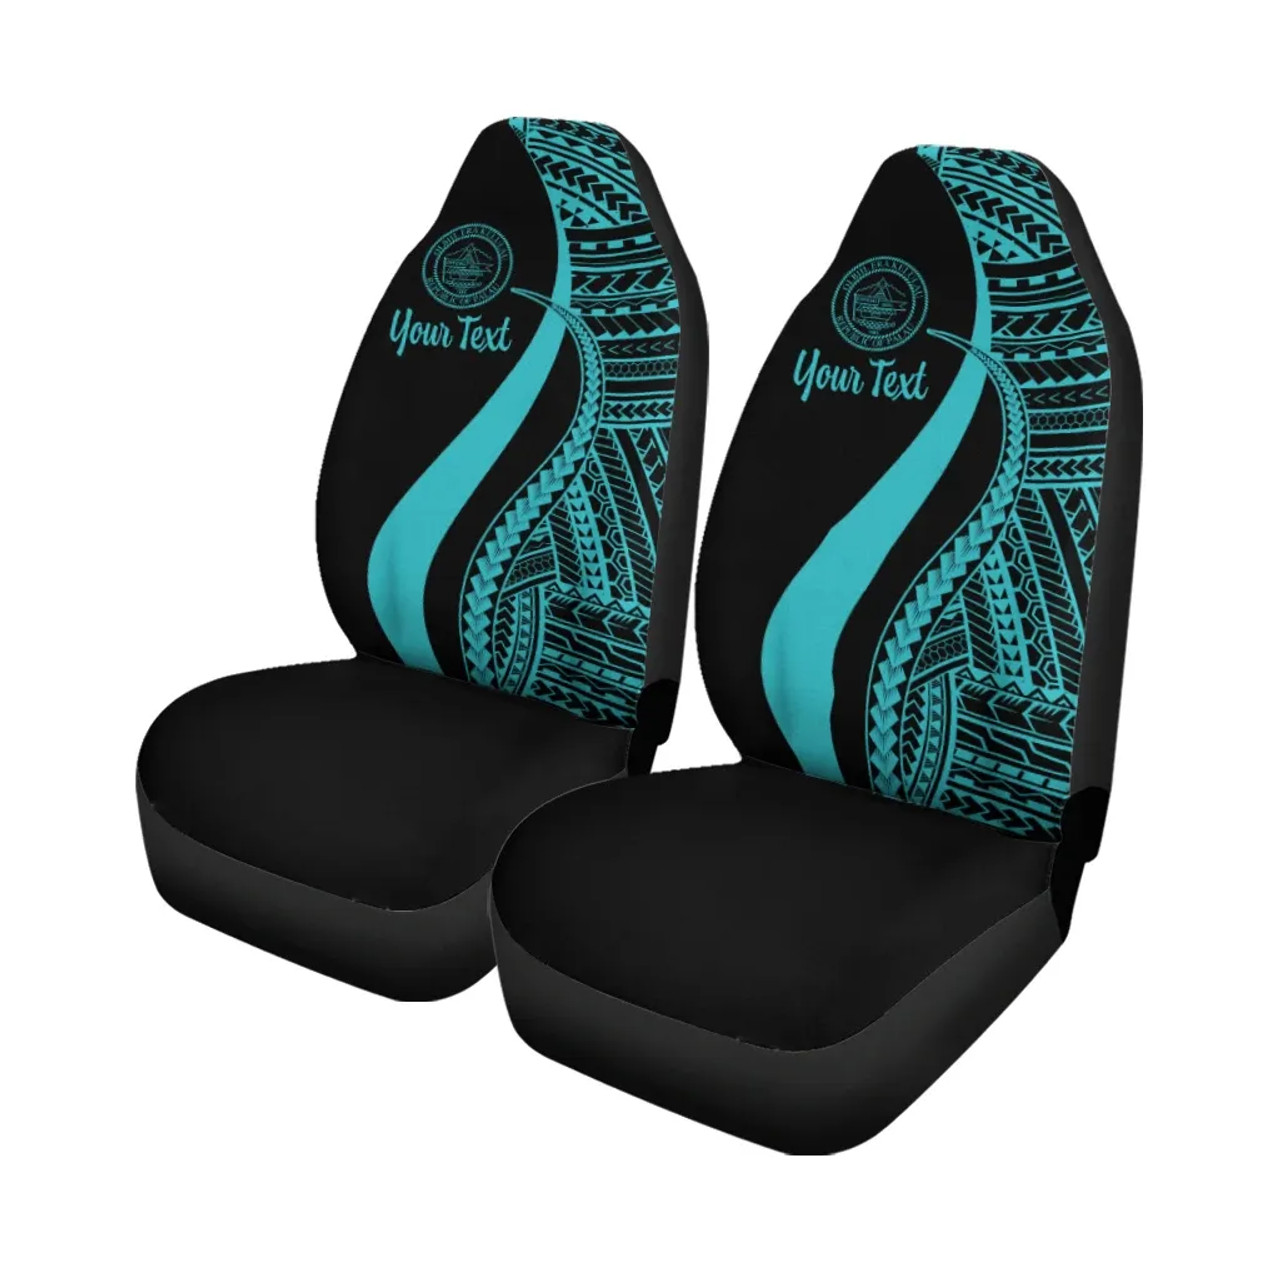 Palau Custom Personalised Car Seat Covers - Turquoise Polynesian Tentacle Tribal Pattern Crest